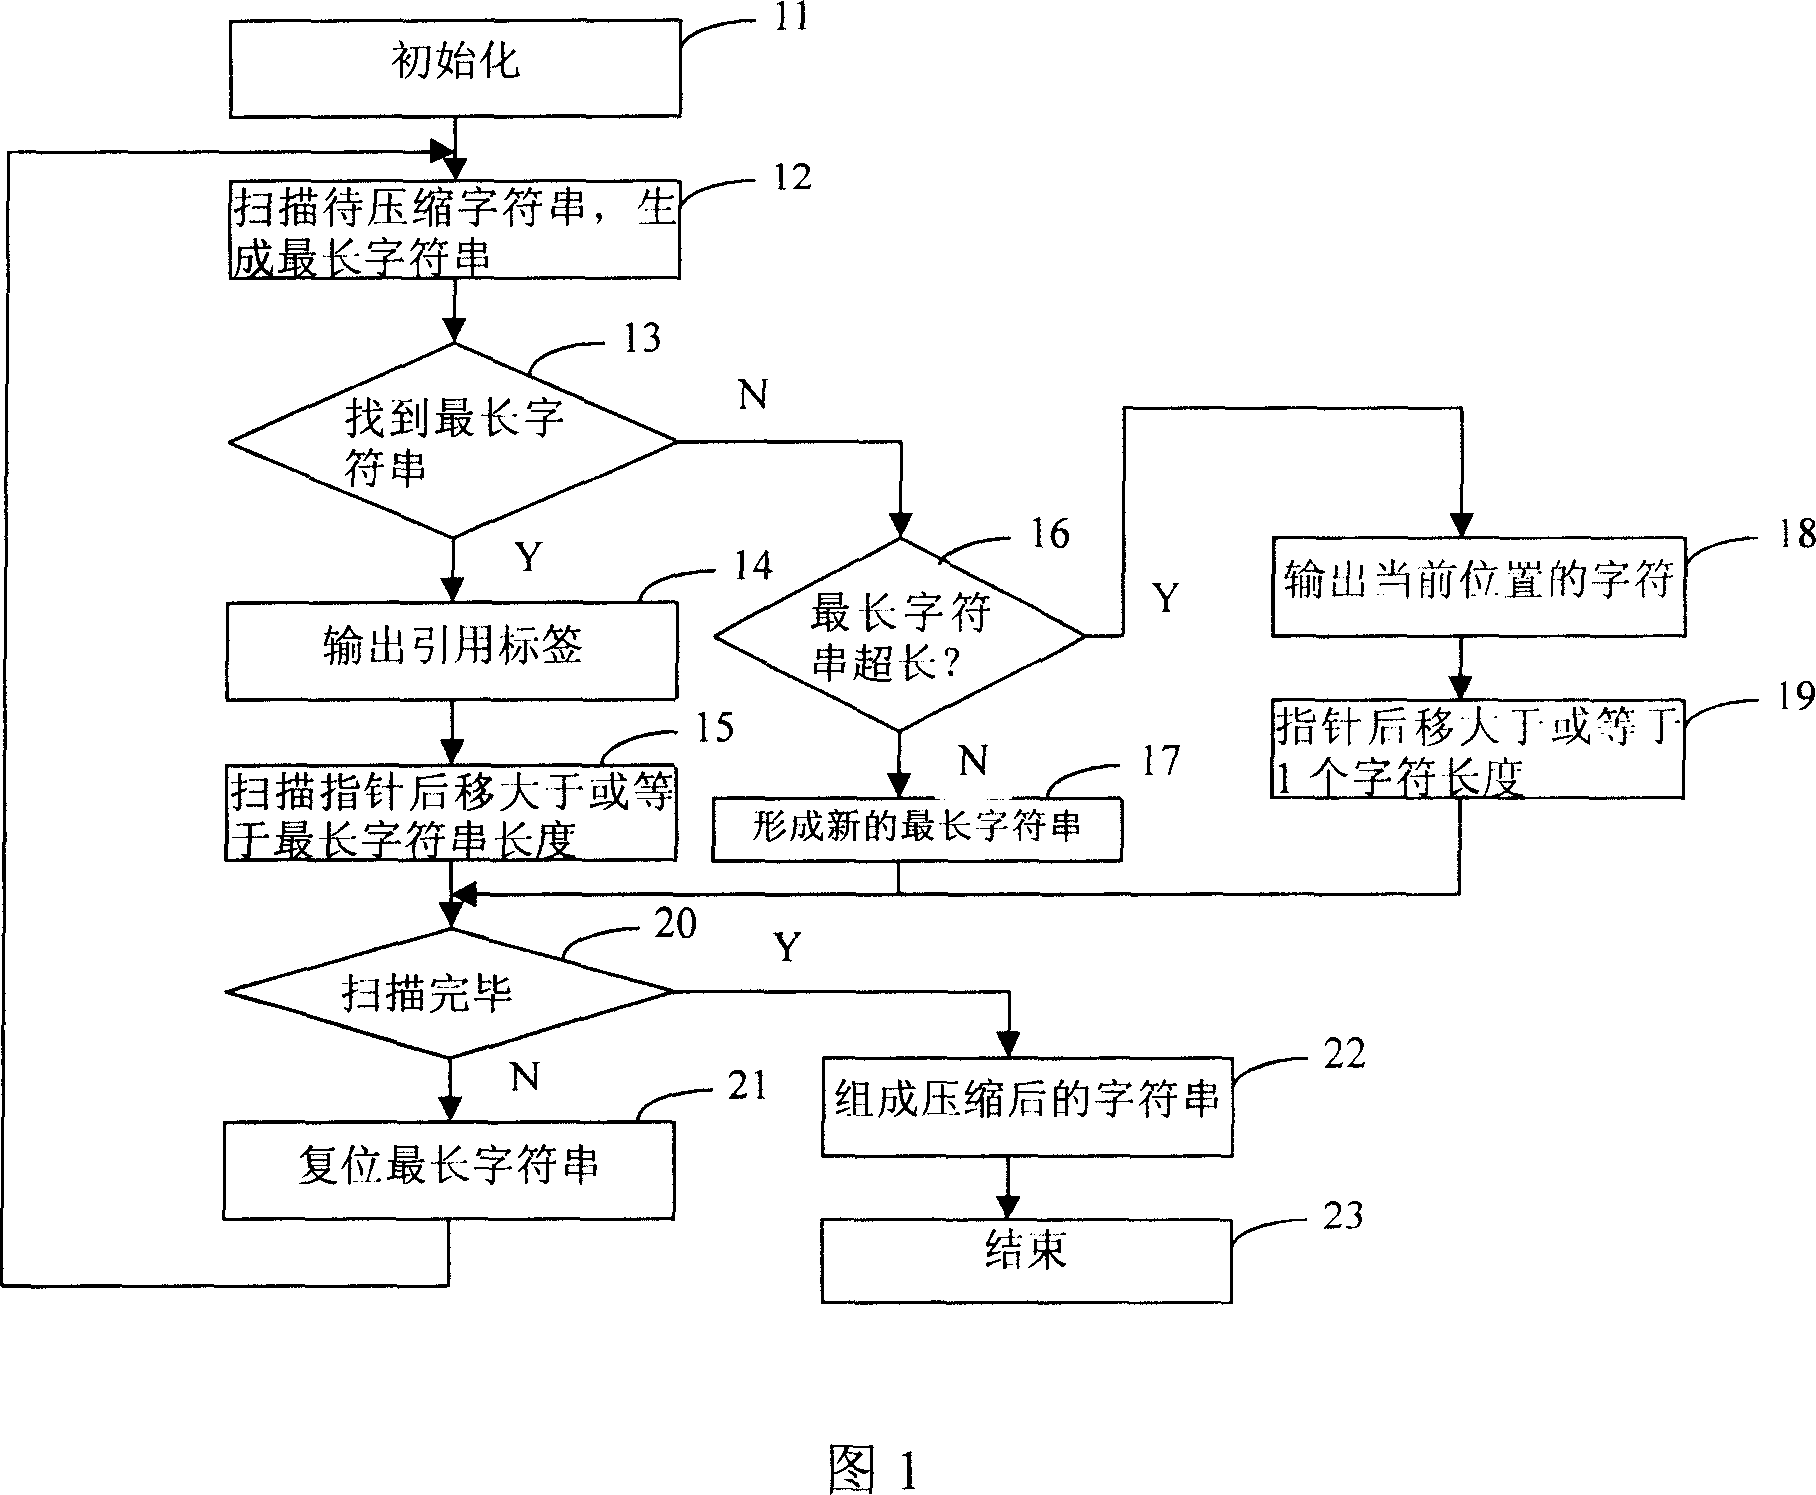 Method and apparatus for compressing data based on digital dictionary picture-representing data